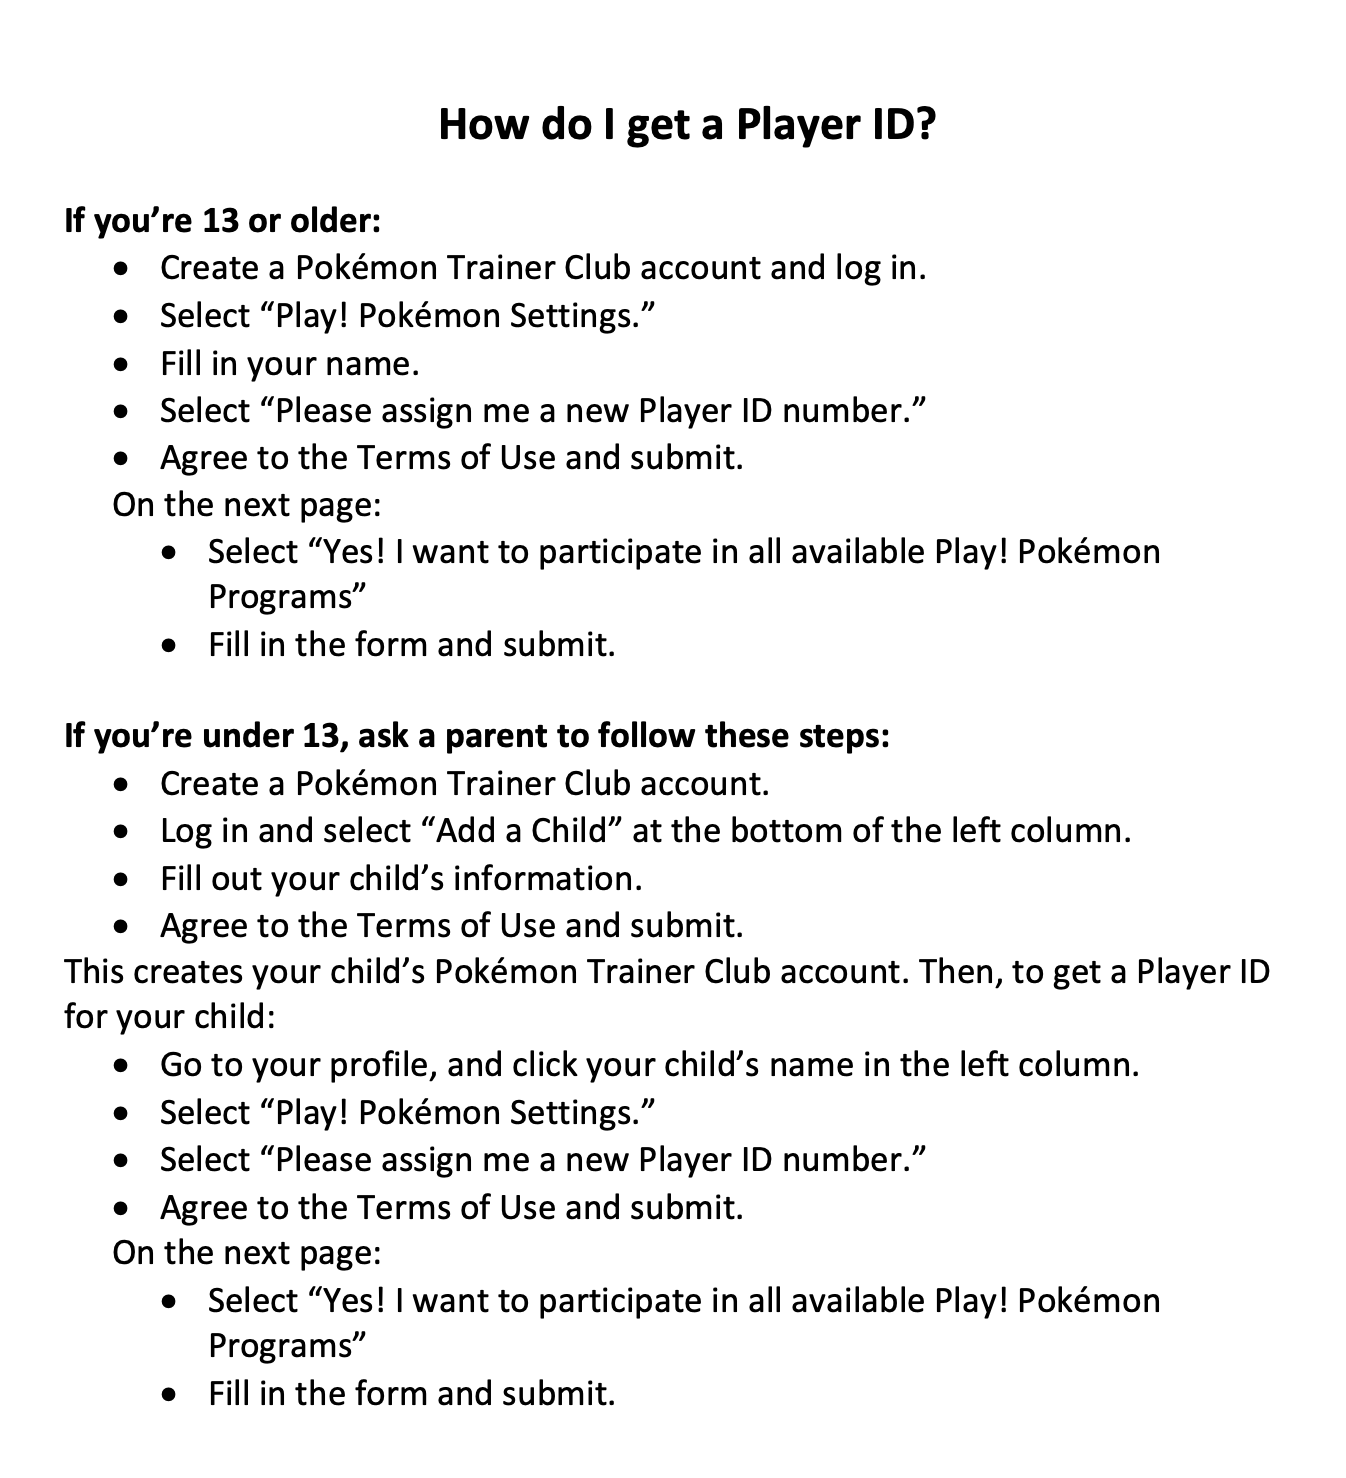 How do I get a Player ID? If you’re 13 or older: • Create a Pokémon Trainer Club account and log in. • Select “Play! Pokémon Settings.” • Fill in your name. • Select “Please assign me a new Player ID number.” • Agree to the Terms of Use and submit. On the next page: • Select “Yes! I want to participate in all available Play! Pokémon Programs” • Fill in the form and submit. If you’re under 13, ask a parent to follow these steps: • Create a Pokémon Trainer Club account. • Log in and select “Add a Child” at the bottom of the left column. • Fill out your child’s information. • Agree to the Terms of Use and submit. This creates your child’s Pokémon Trainer Club account. Then, to get a Player ID for your child: • Go to your profile, and click your child’s name in the left column. • Select “Play! Pokémon Settings.” • Select “Please assign me a new Player ID number.” • Agree to the Terms of Use and submit. On the next page: • Select “Yes! I want to participate in all available Play! Pokémon Programs” • Fill in the form and submit.